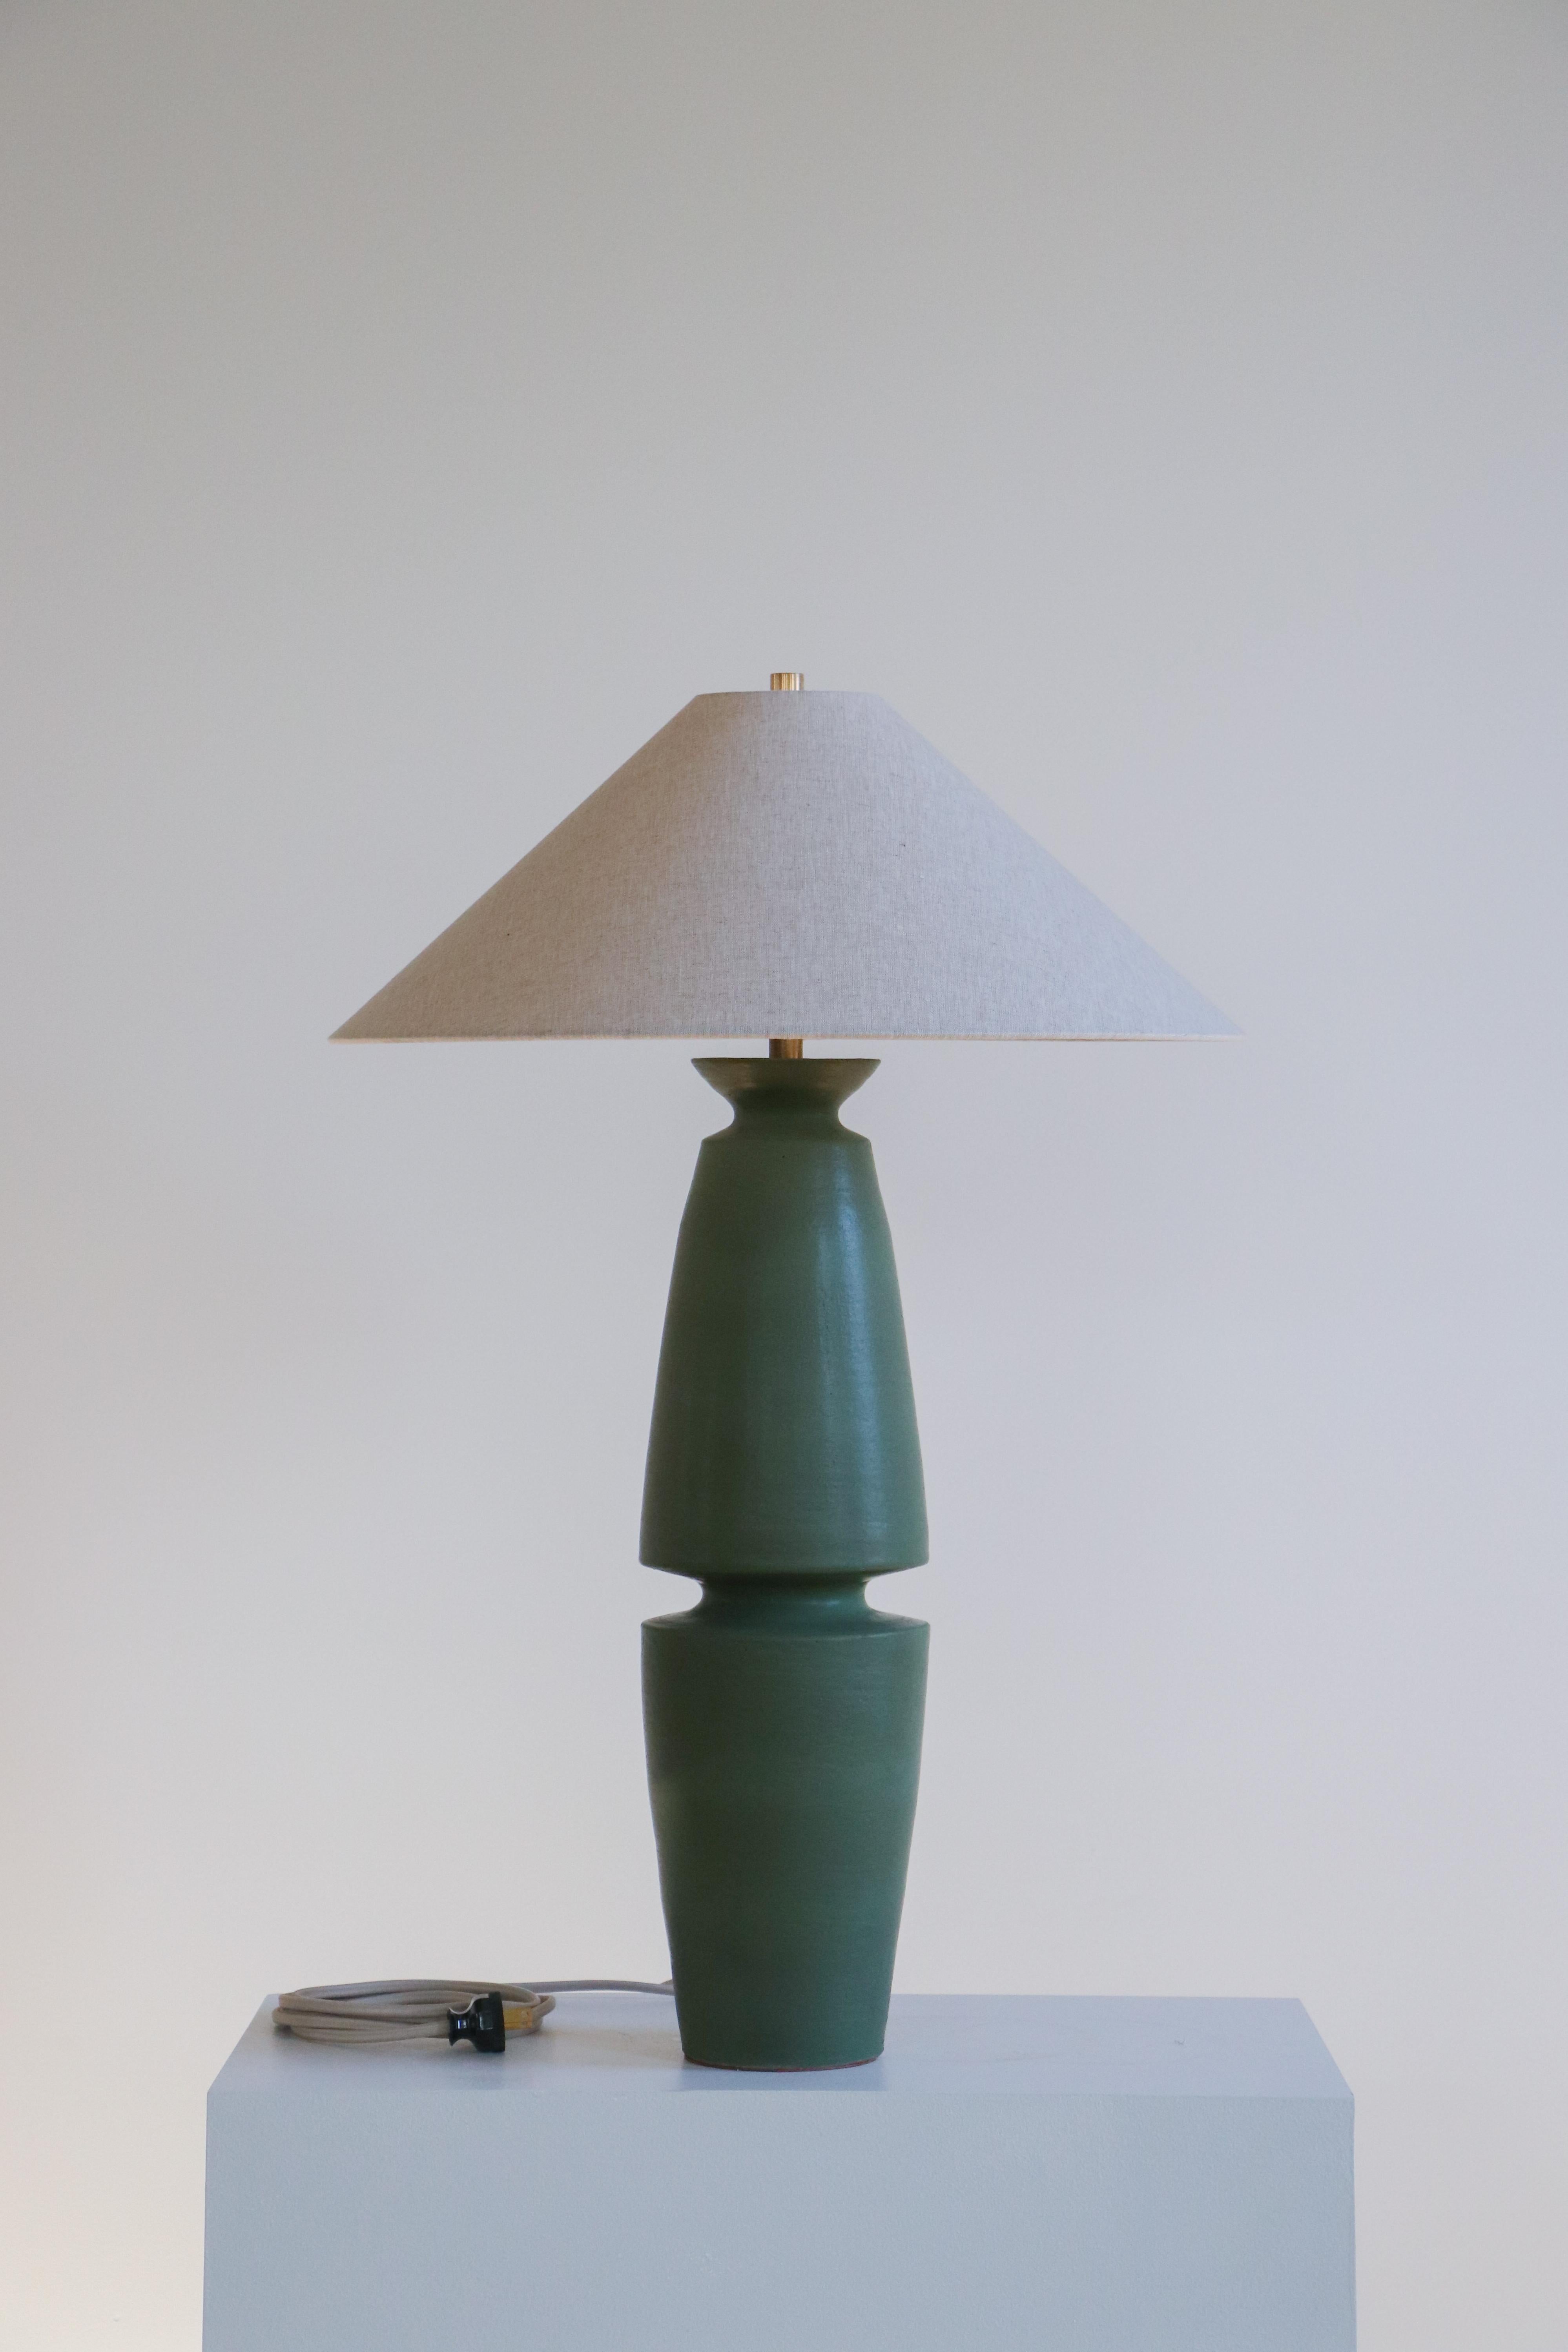 Ivy Serena Table Lamp by Danny Kaplan Studio
Dimensions: ⌀ 51 x H 71 cm
Materials: Glazed Ceramic, Unfinished Brass, Linen

This item is handmade, and may exhibit variability within the same piece. We do our best to maintain a consistent product,